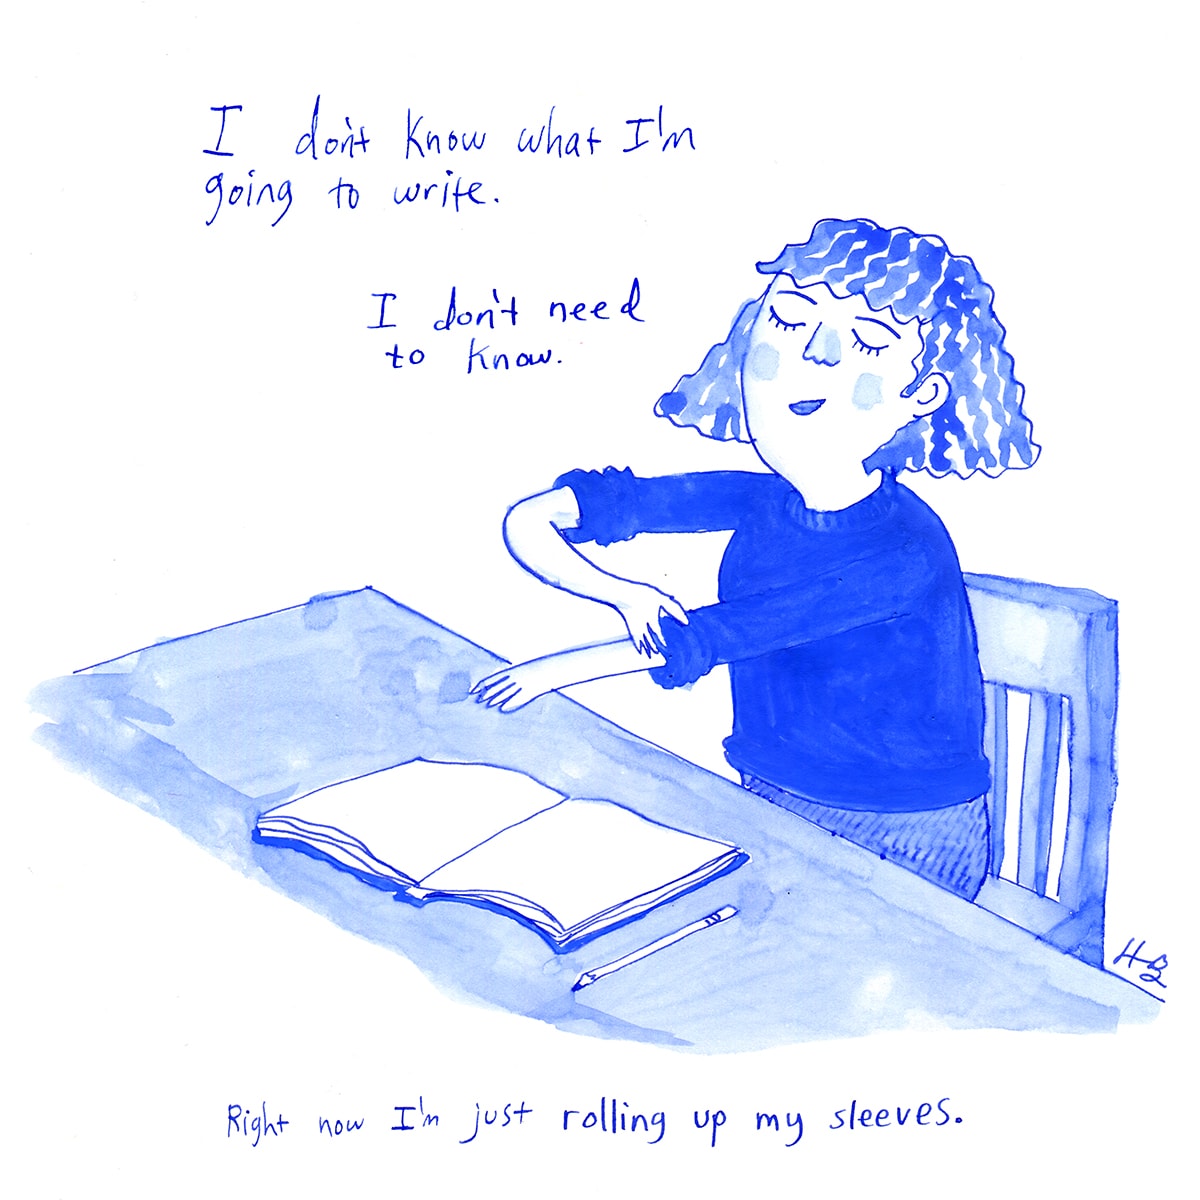 illustration of a person pushing up their sleeves at a table in front of an empty book. It's in blue, and there's text that reads "I don't know what I'm going to write. I don't need to know. Right now I'm just rolling up my sleeves."